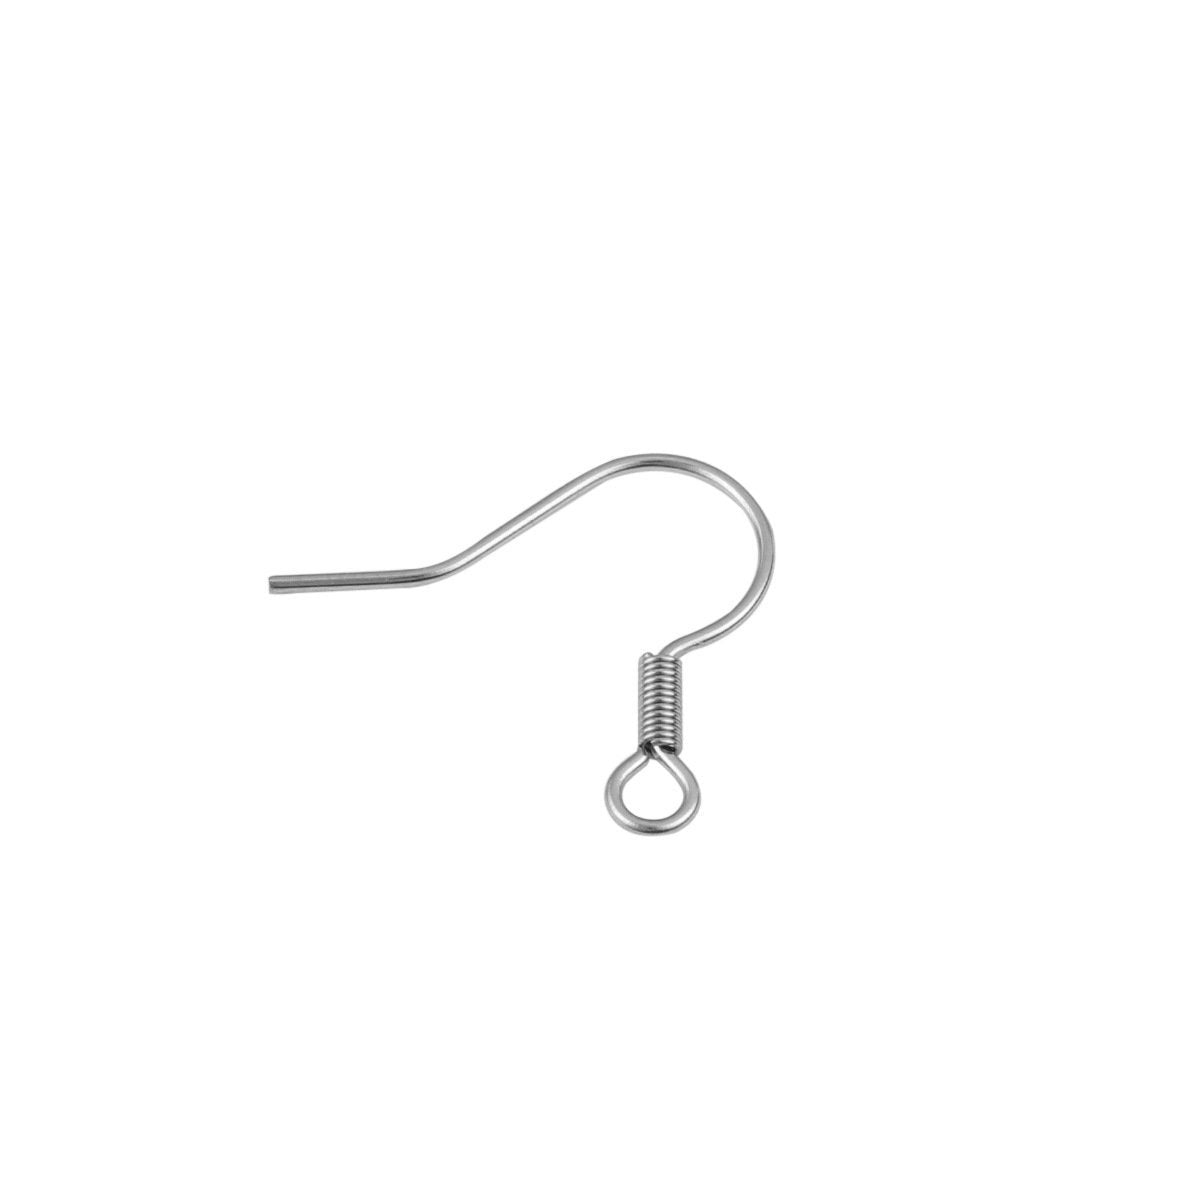 Stainless steel earring hooks 50 pcs (25 pairs) - Nickel free, lead free and cadmium free earwire